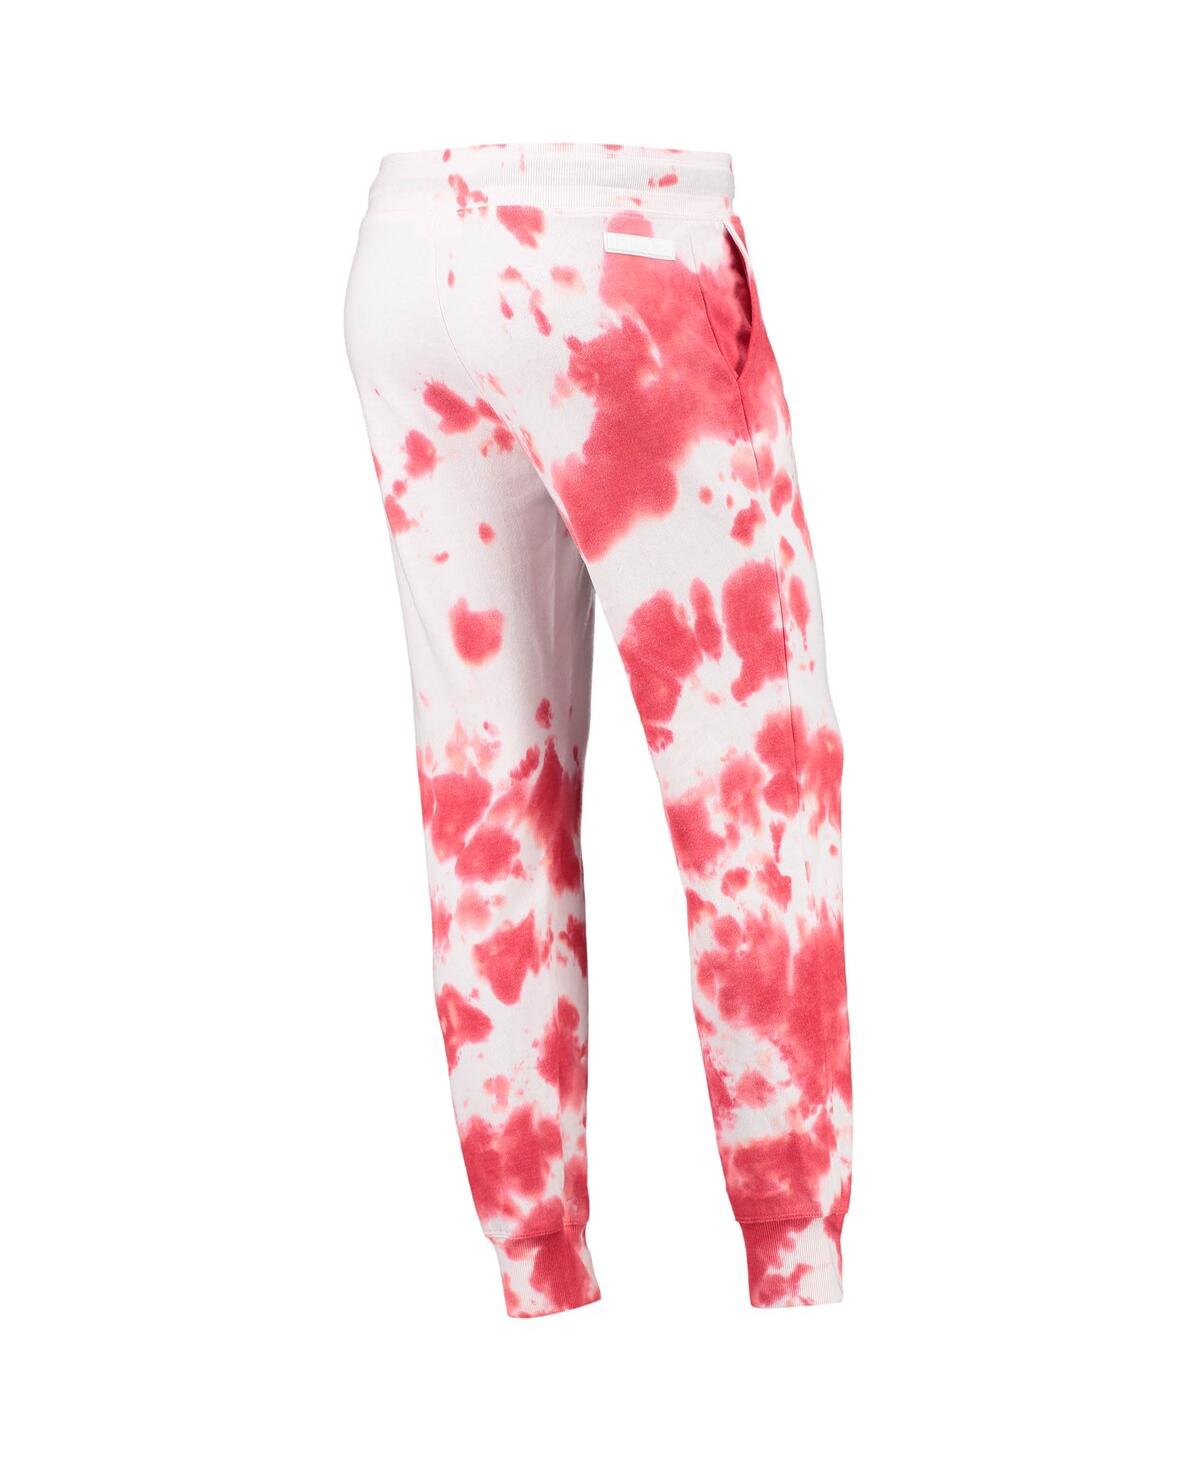 Shop Dkny Women's  Sport White, Red Washington Nationals Melody Tie-dye Jogger Pants In White,red